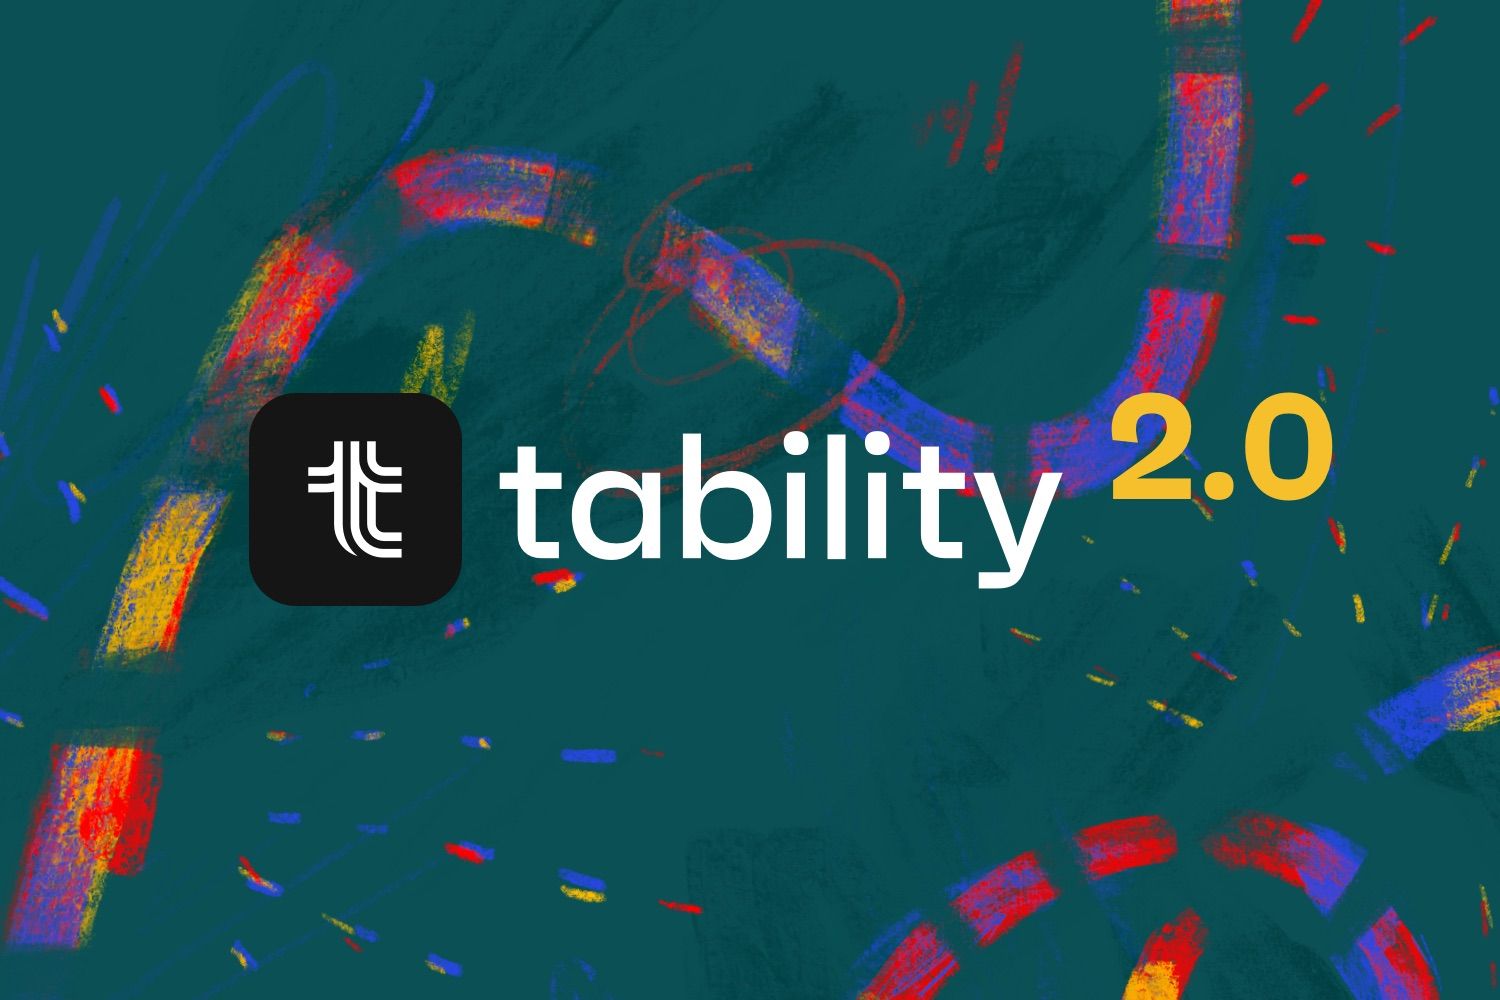 Tability 2.0 is coming!